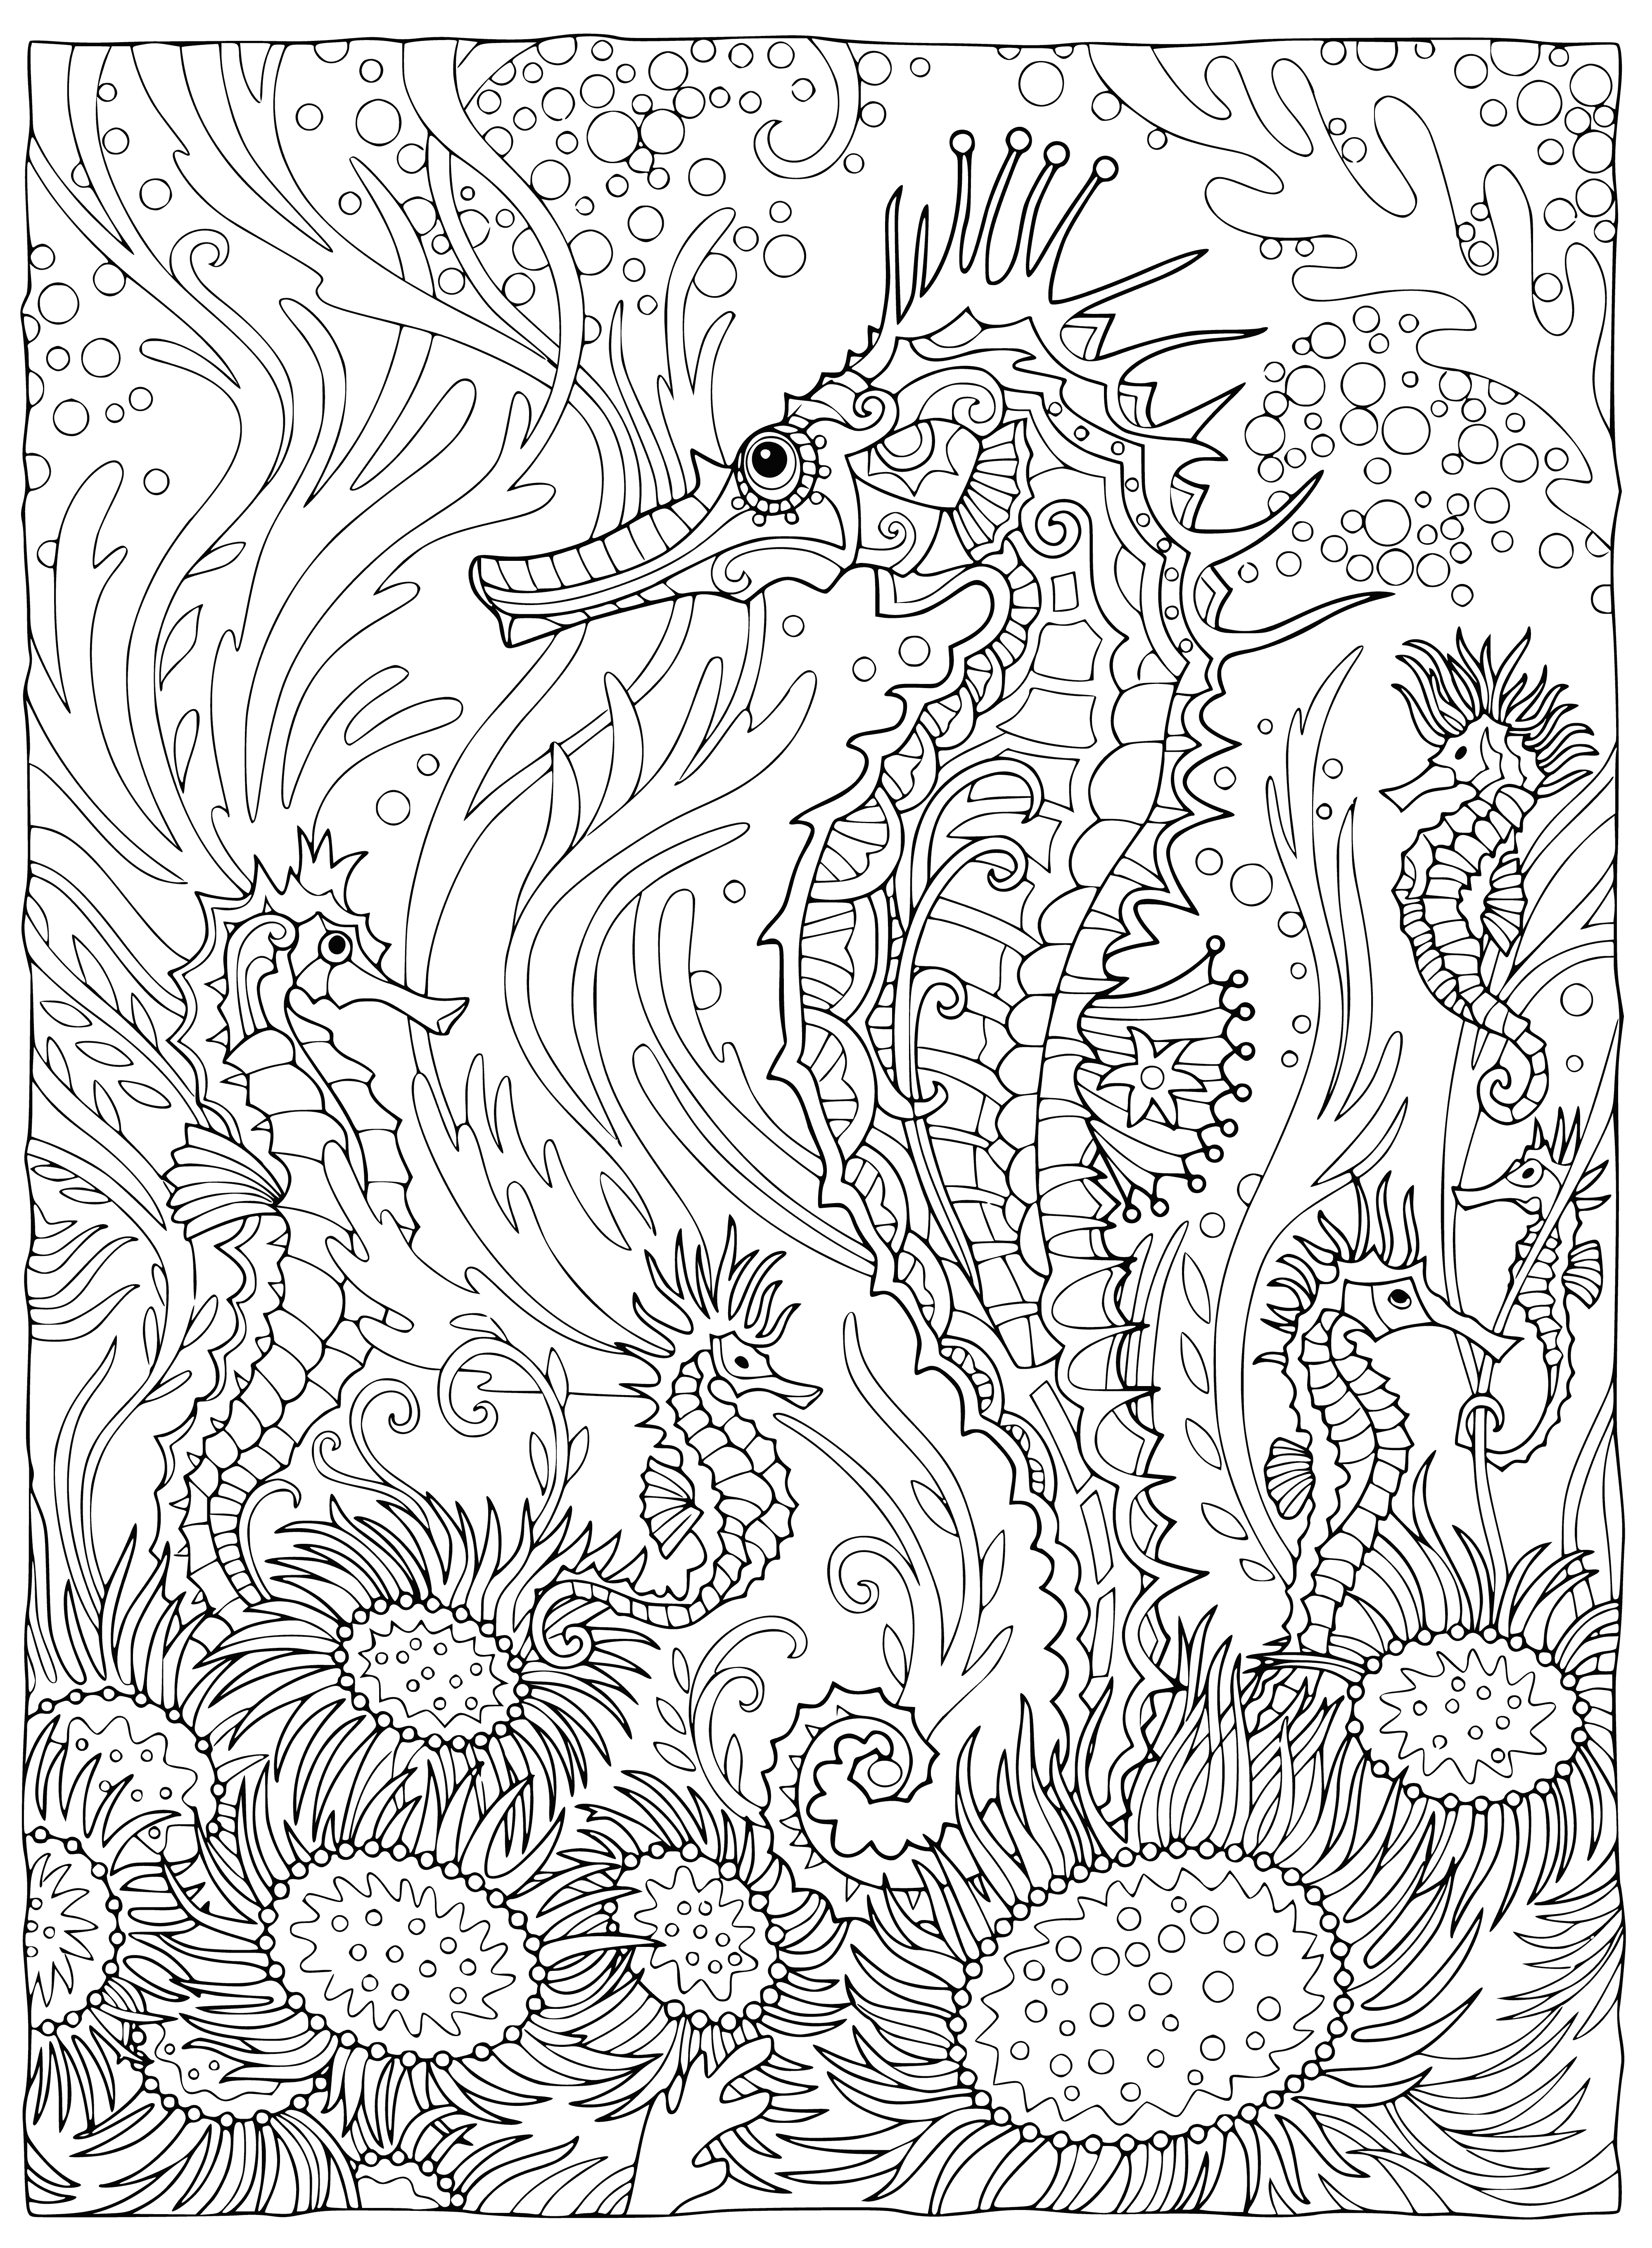 coloring page: A sea horse swims among fishes & plants in a circular pattern on this coloring page.